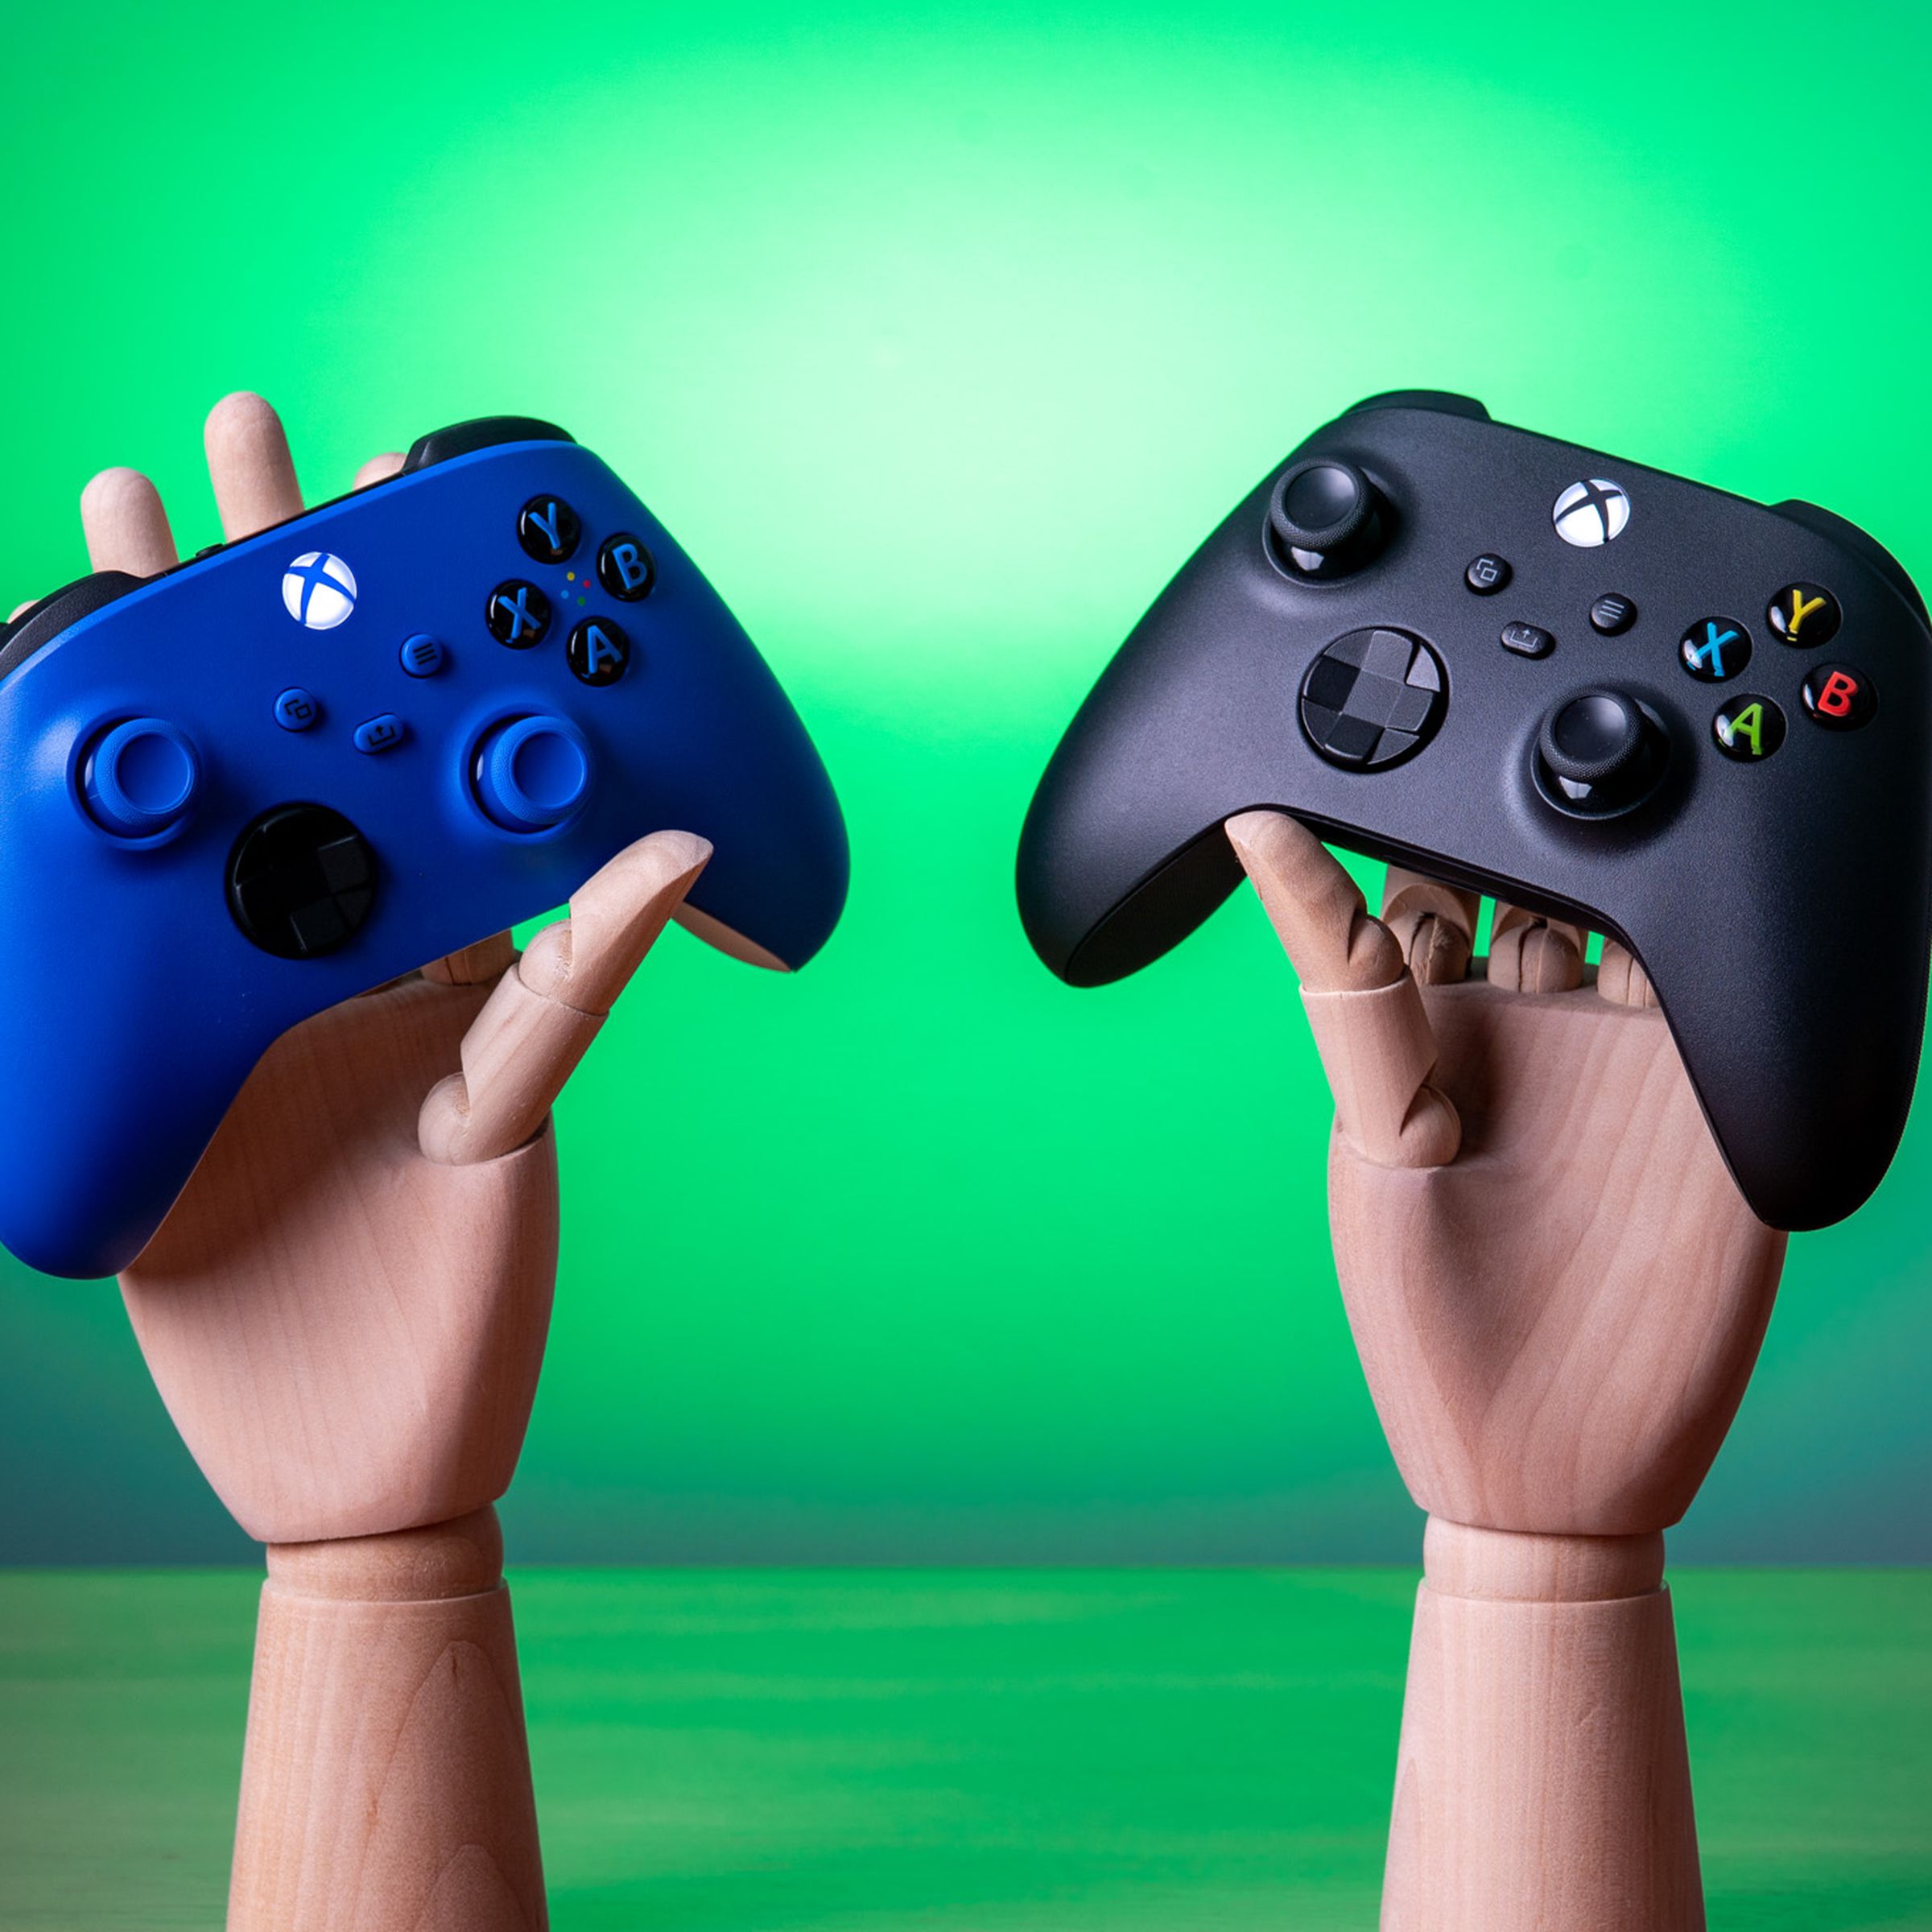 Two Xbox controllers, one blue and one black, being held by wooden mannequin hands.